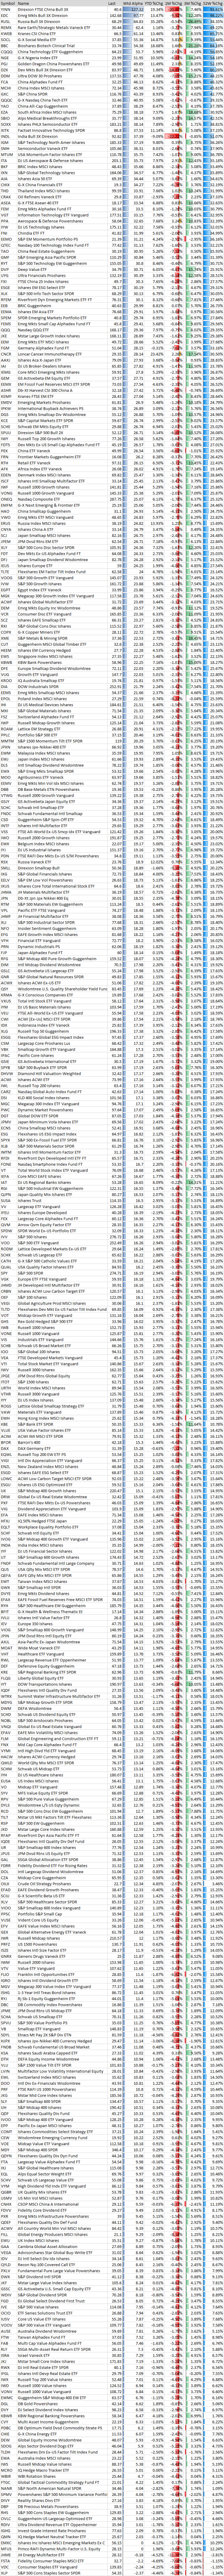 ETF-2018-02-24.png